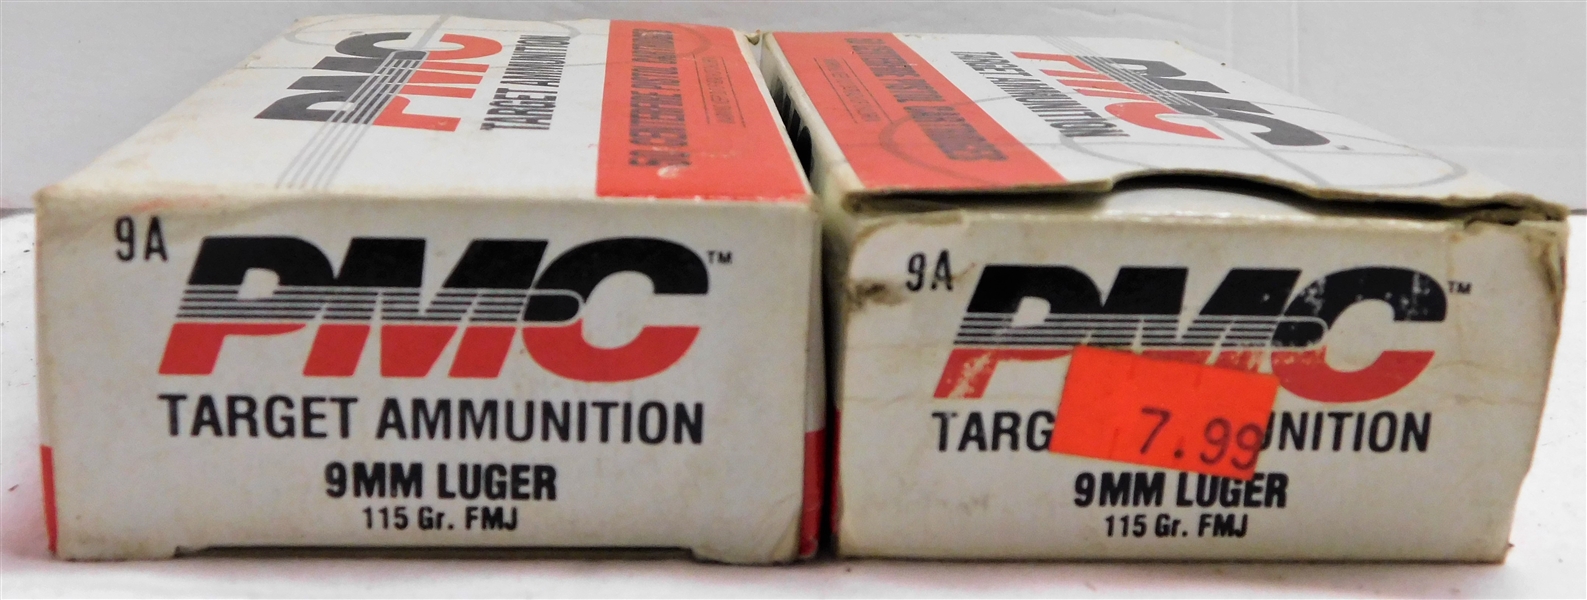 100 Rounds of 115 Grain 9mm Luger PMC Target Ammunition